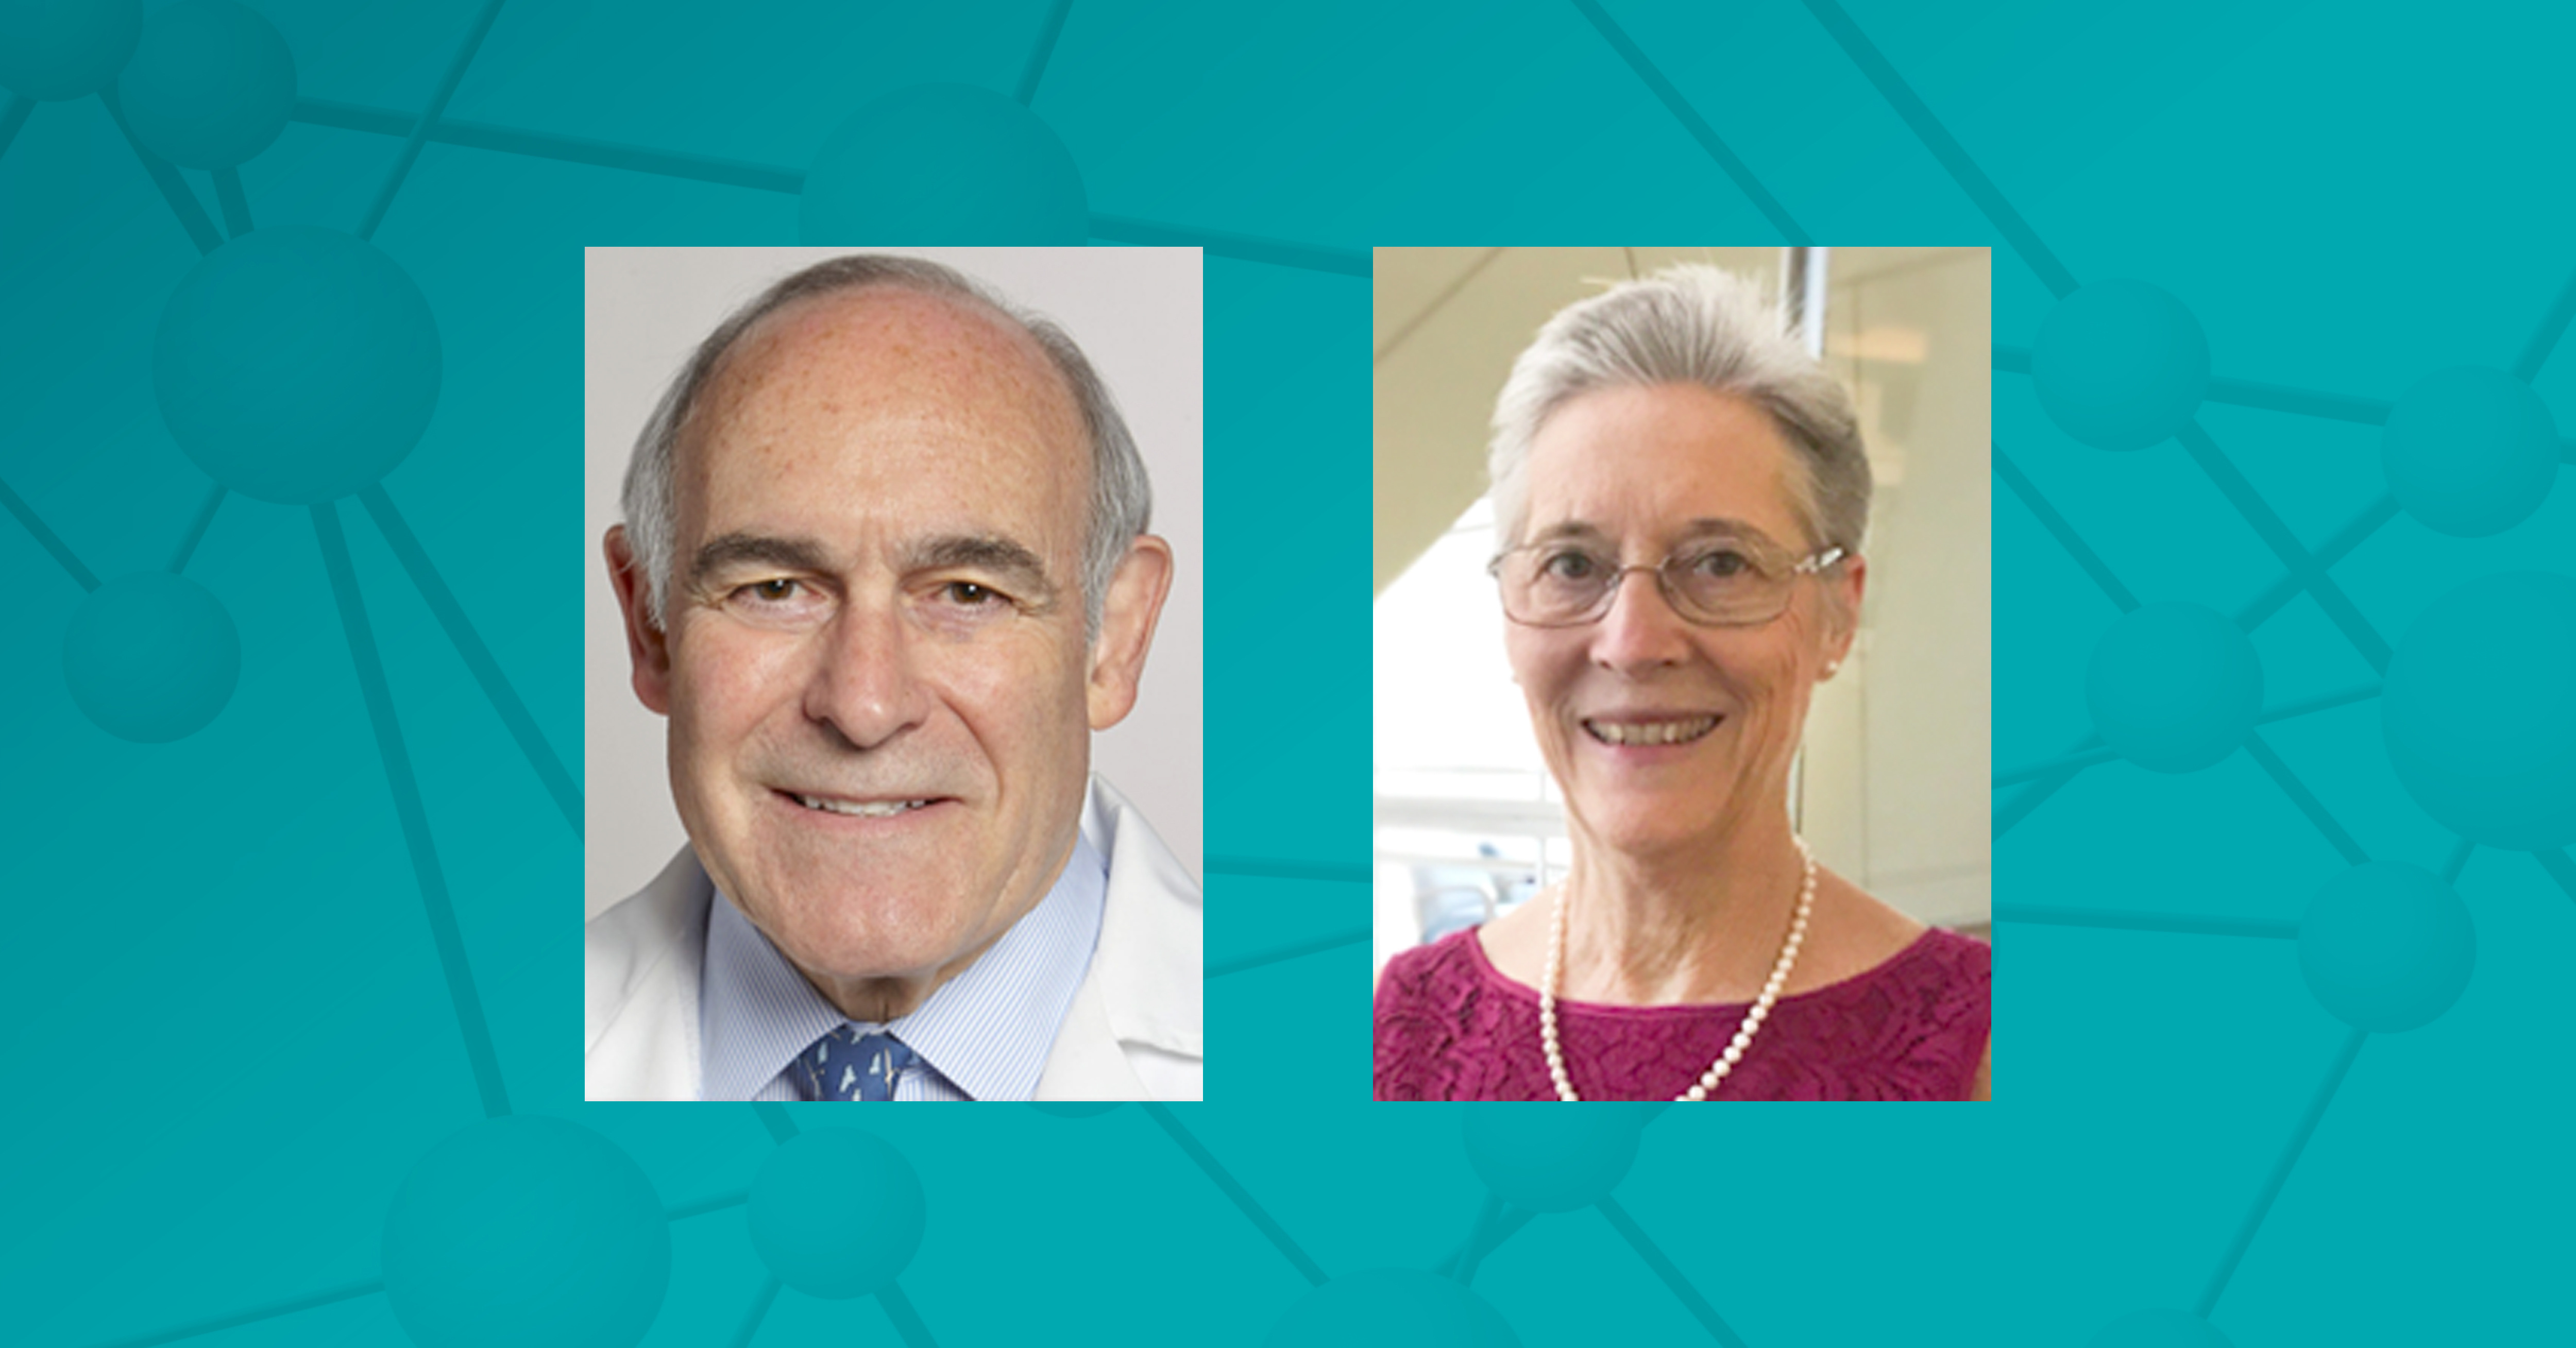 Photos of 2017 Rare Impact Award winners Dr. Robert Desnick and Dr. Cynthia Tifft appear on a turquoise background